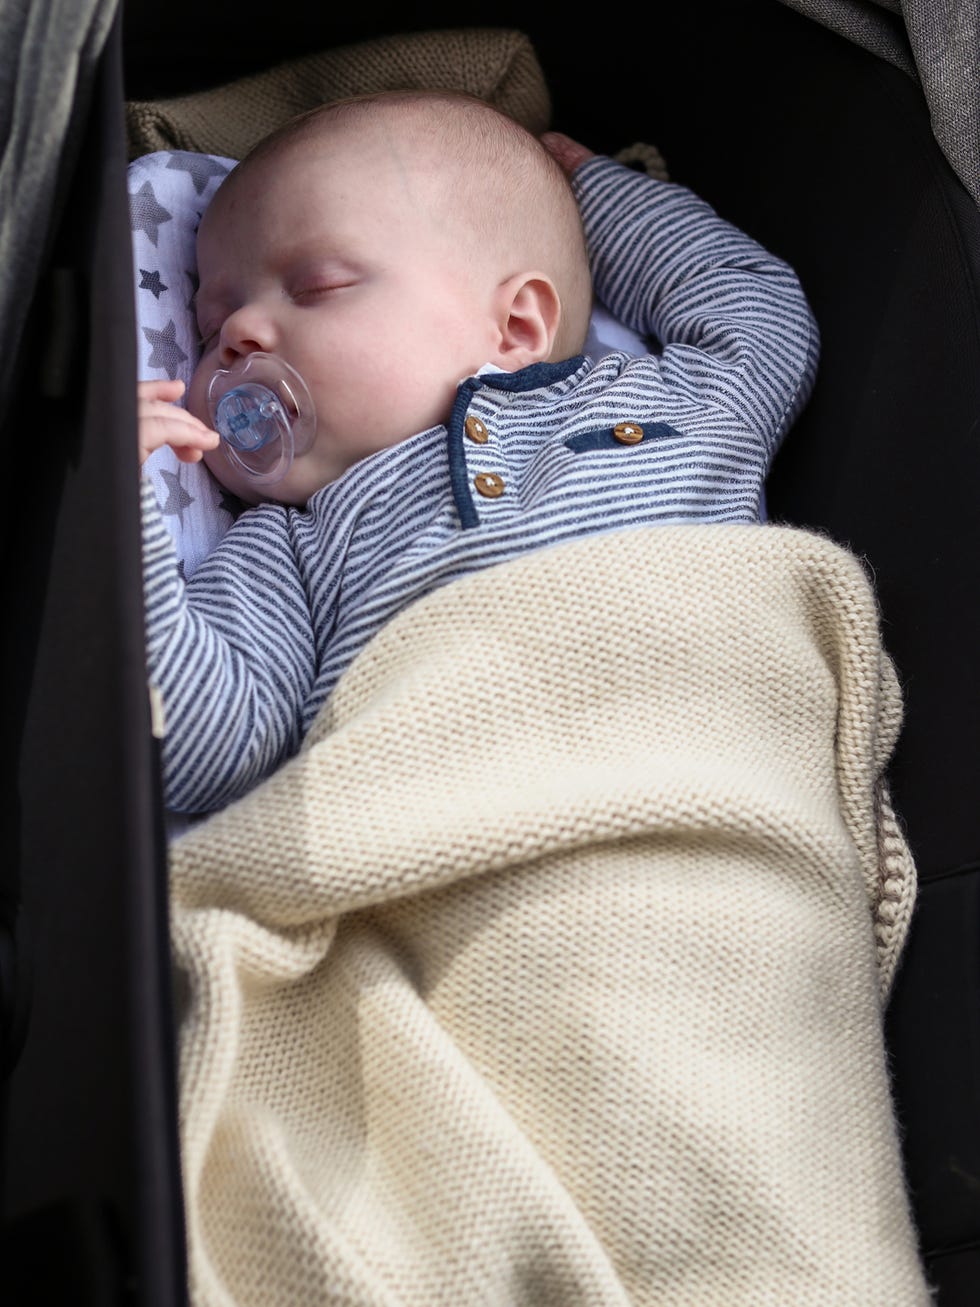 Child, Product, Baby, Skin, Baby in car seat, Cheek, Sleep, Baby Products, Toddler, Nose, 